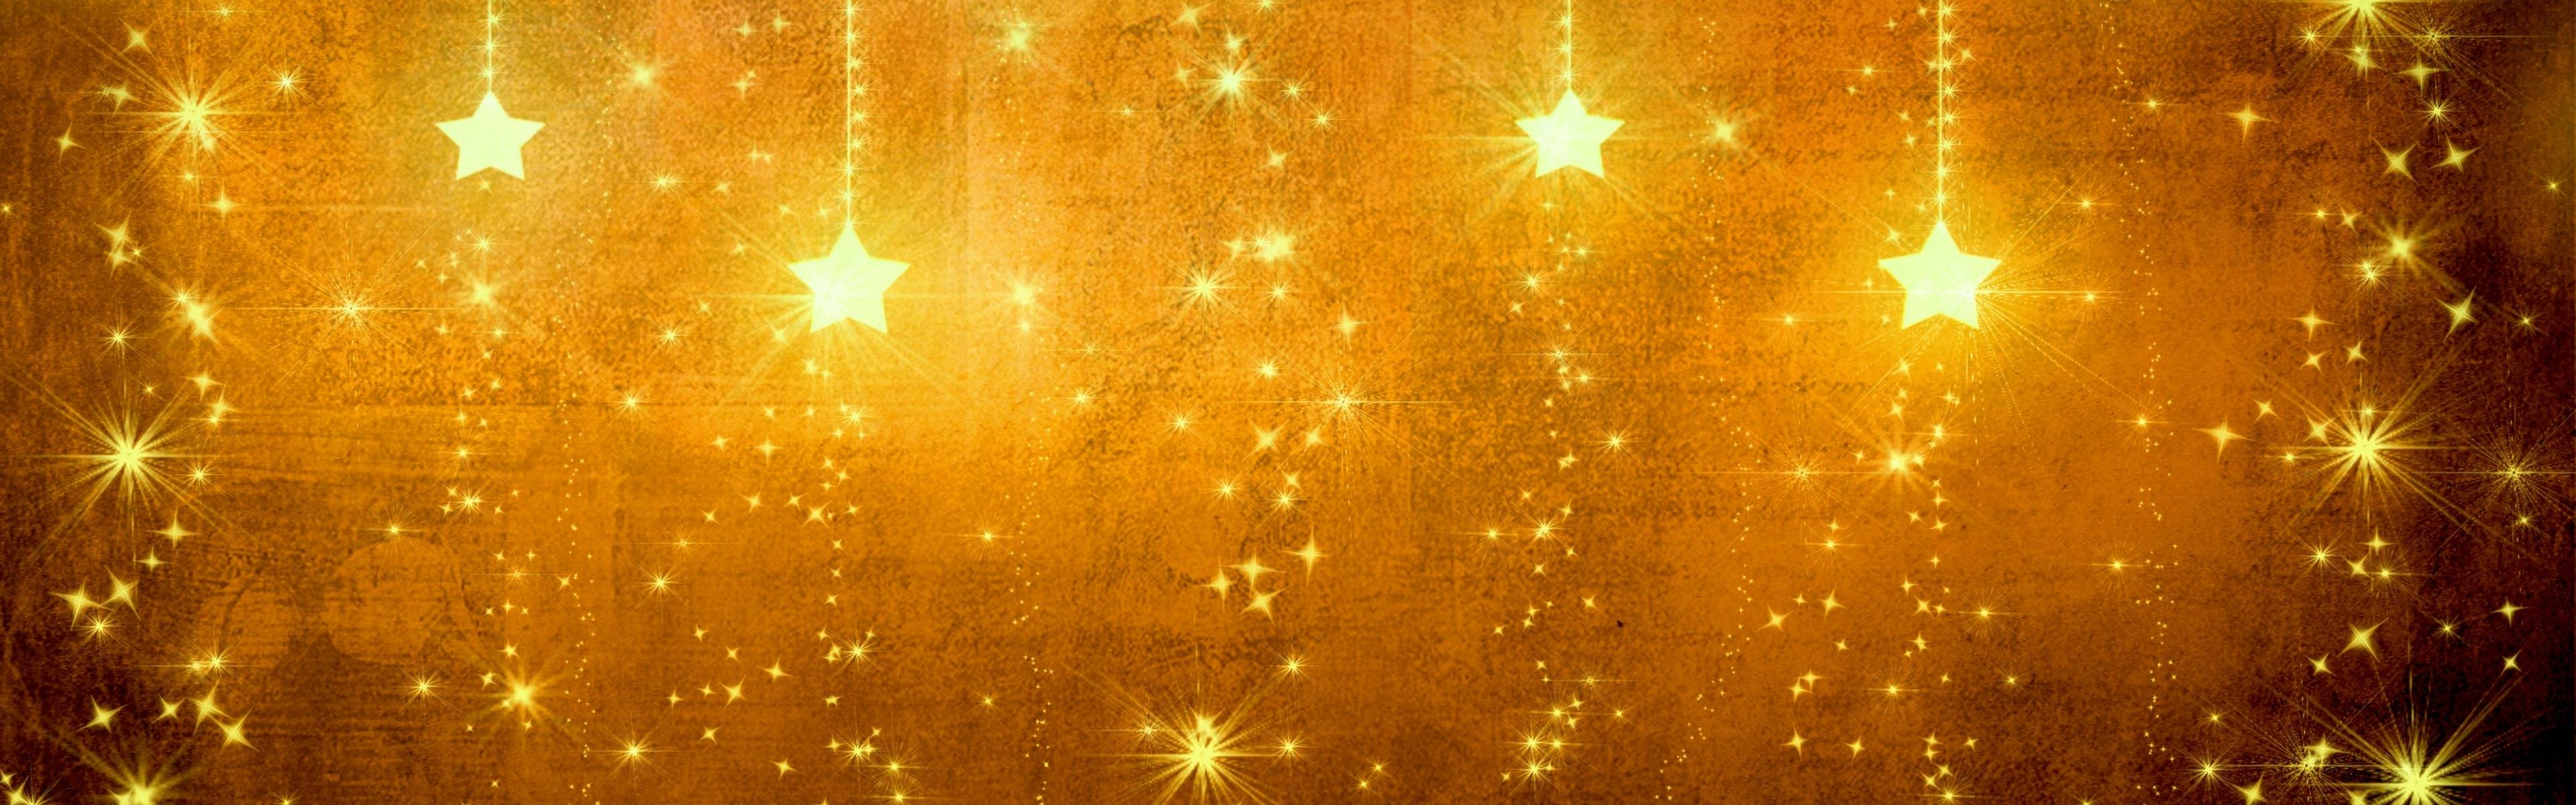 Download Wallpapers 3840x1200 star, gold, holiday, backgrounds